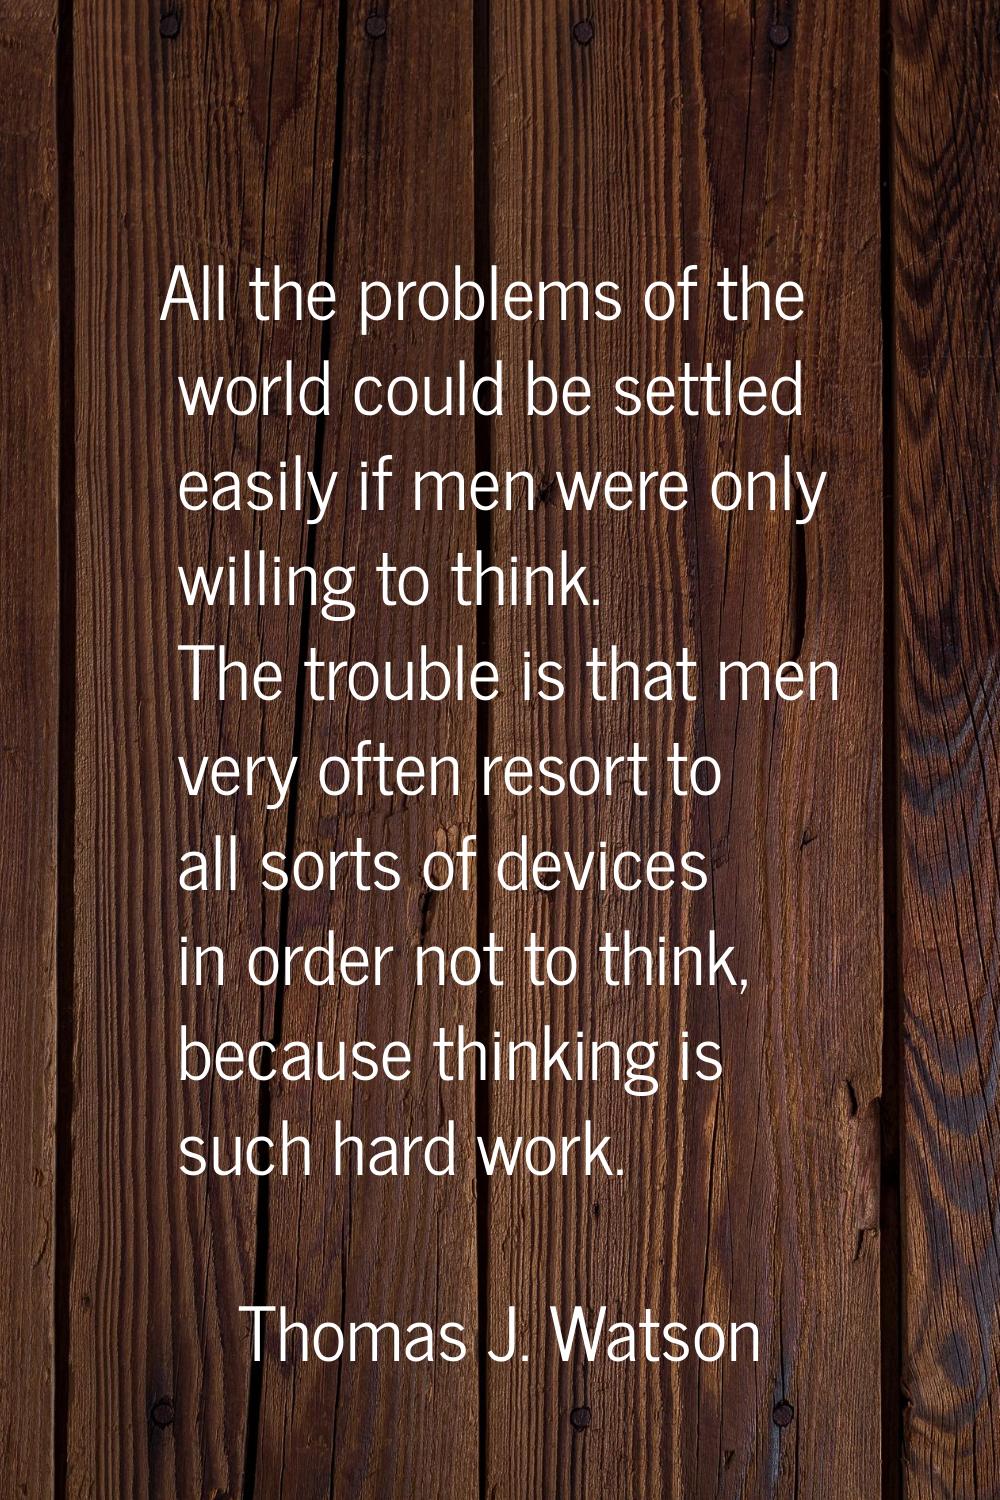 All the problems of the world could be settled easily if men were only willing to think. The troubl